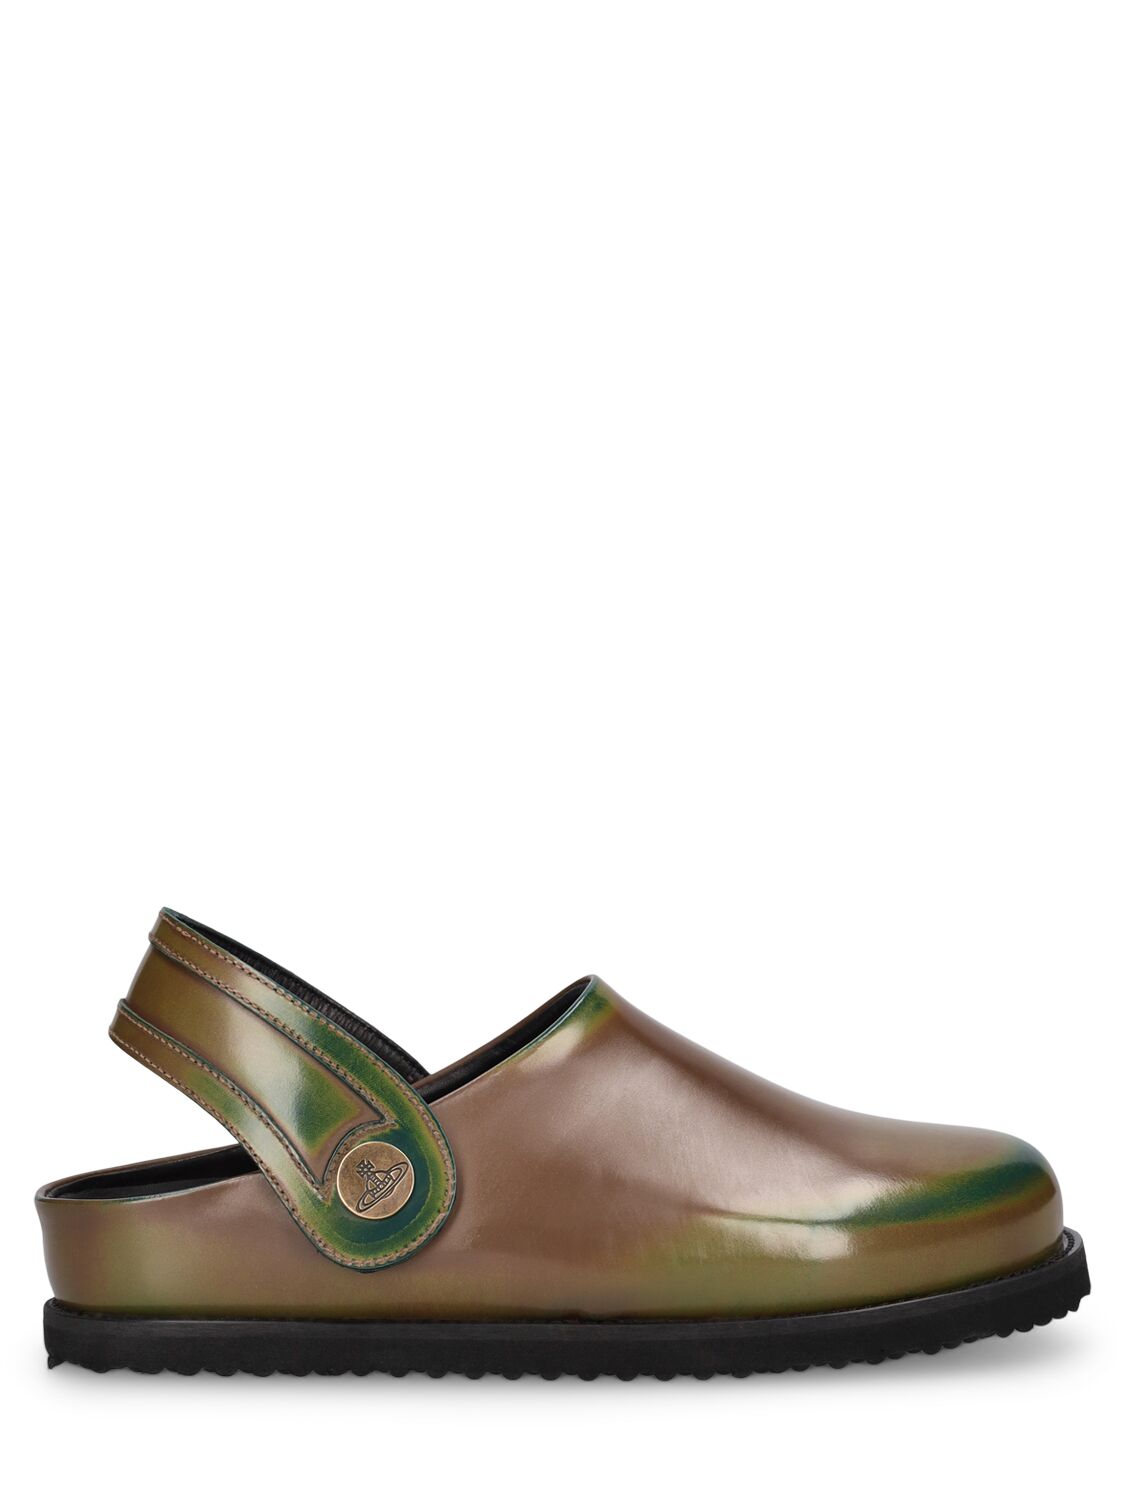 Shop Vivienne Westwood oz Leather Clog Mules In Brown,green